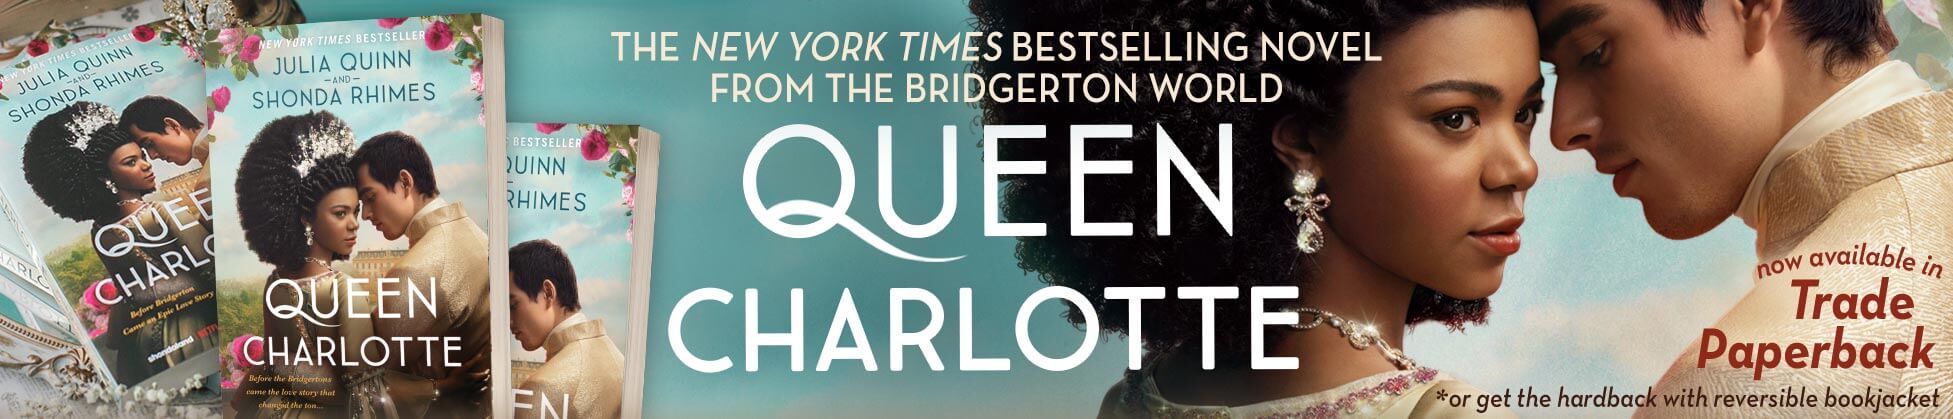 From #1 New York Times bestselling author Julia Quinn and television pioneer Shonda Rhimes comes a powerful and romantic novel of Bridgerton’s Queen Charlotte and King George III’s great love story and how it sparked a societal shift, inspired by the original series Queen Charlotte: A Bridgerton Story, created by Shondaland and streaming May 4 only on Netflix.